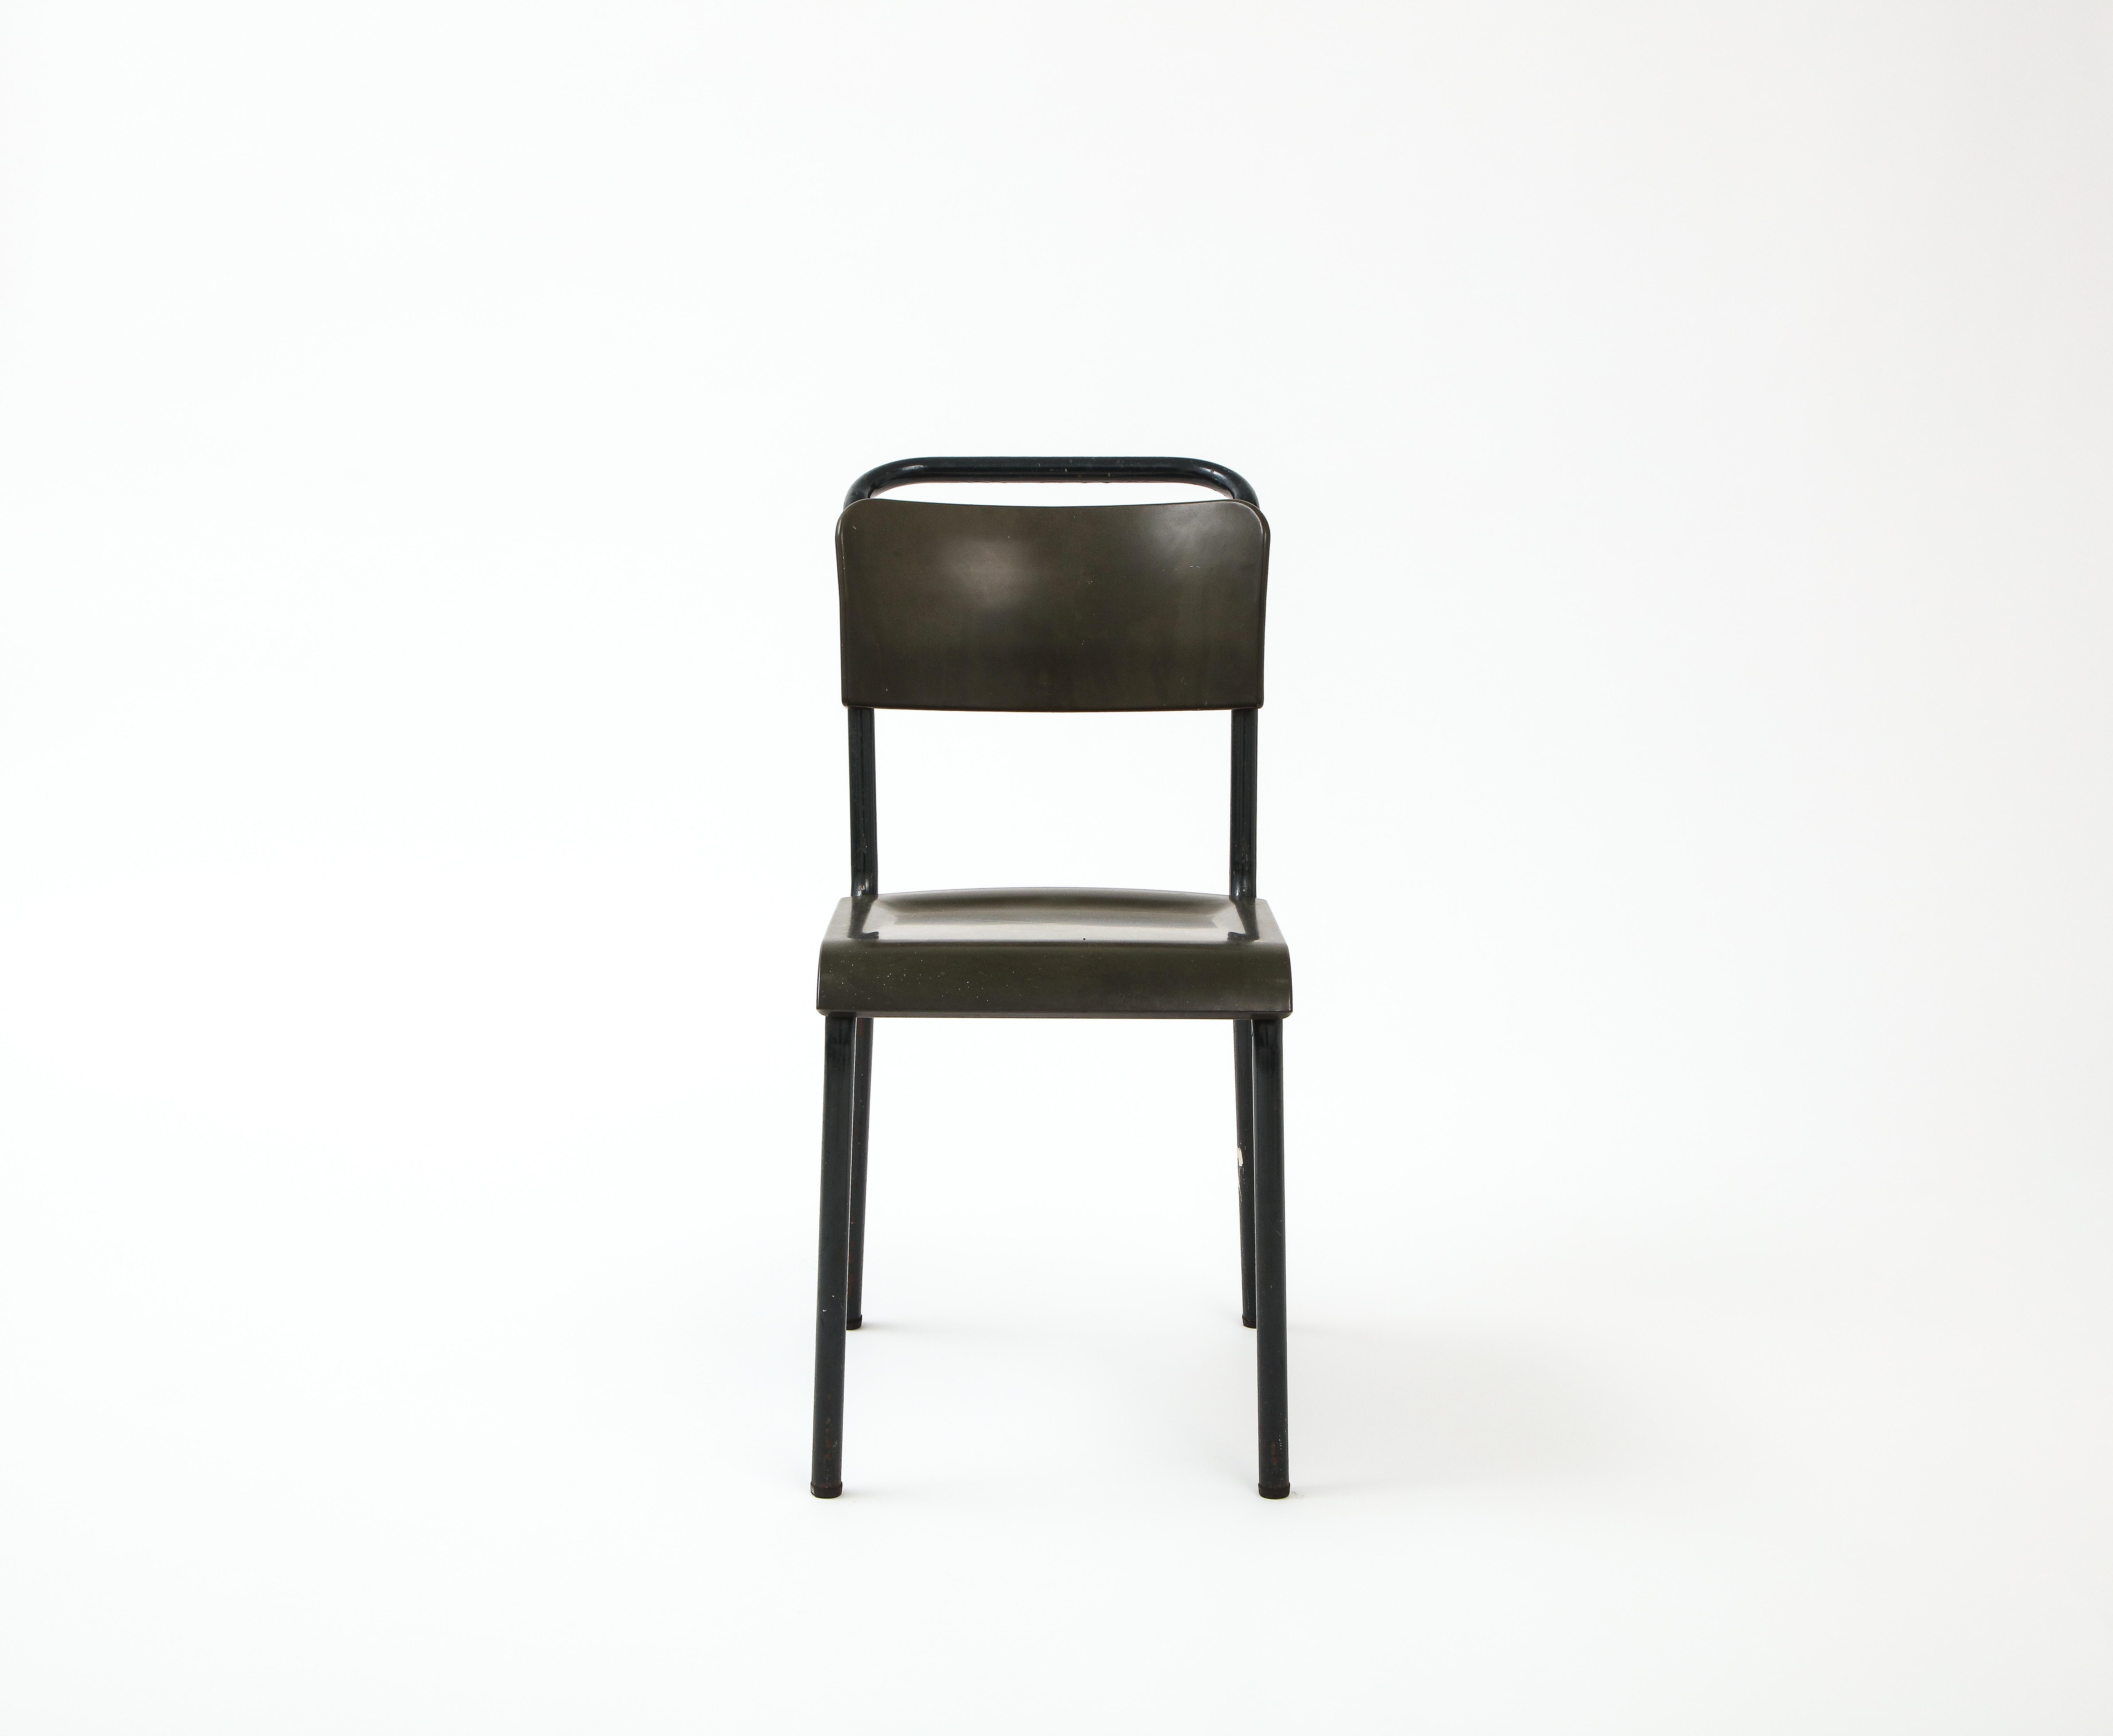 Exceptional French mid-century single side chair in the style of Pierre Guariche. 

Made in 1950's France. Industrial styling, fabricated with black metal frame and bakelite seat.

The striking form makes it the perfect stand-out statement and /